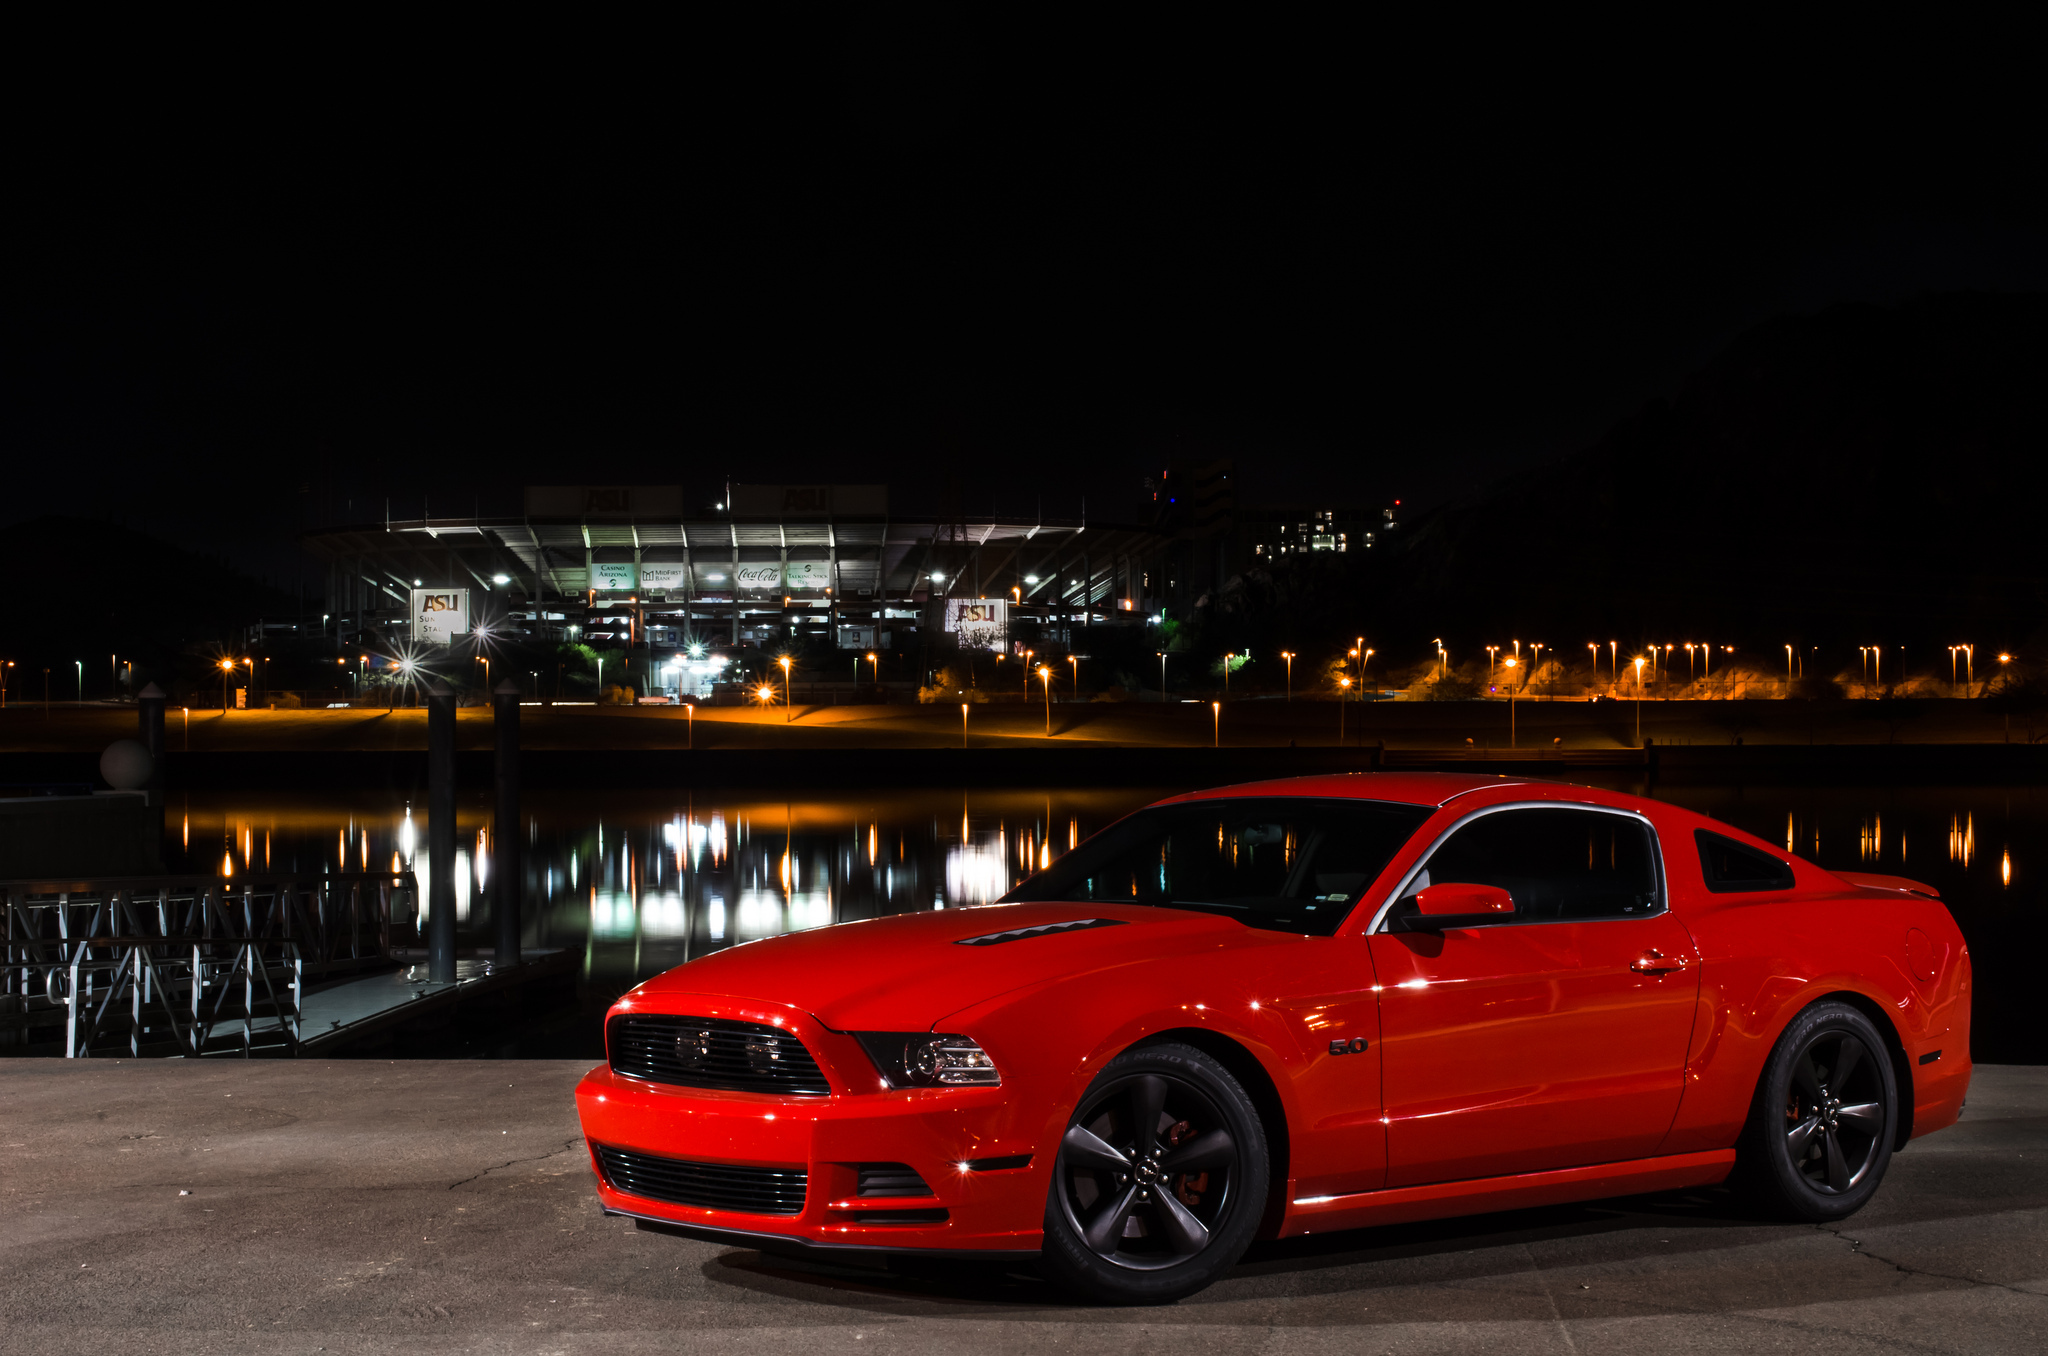 126597 download wallpaper ford, red, mustang, cars, side view, gt screensavers and pictures for free